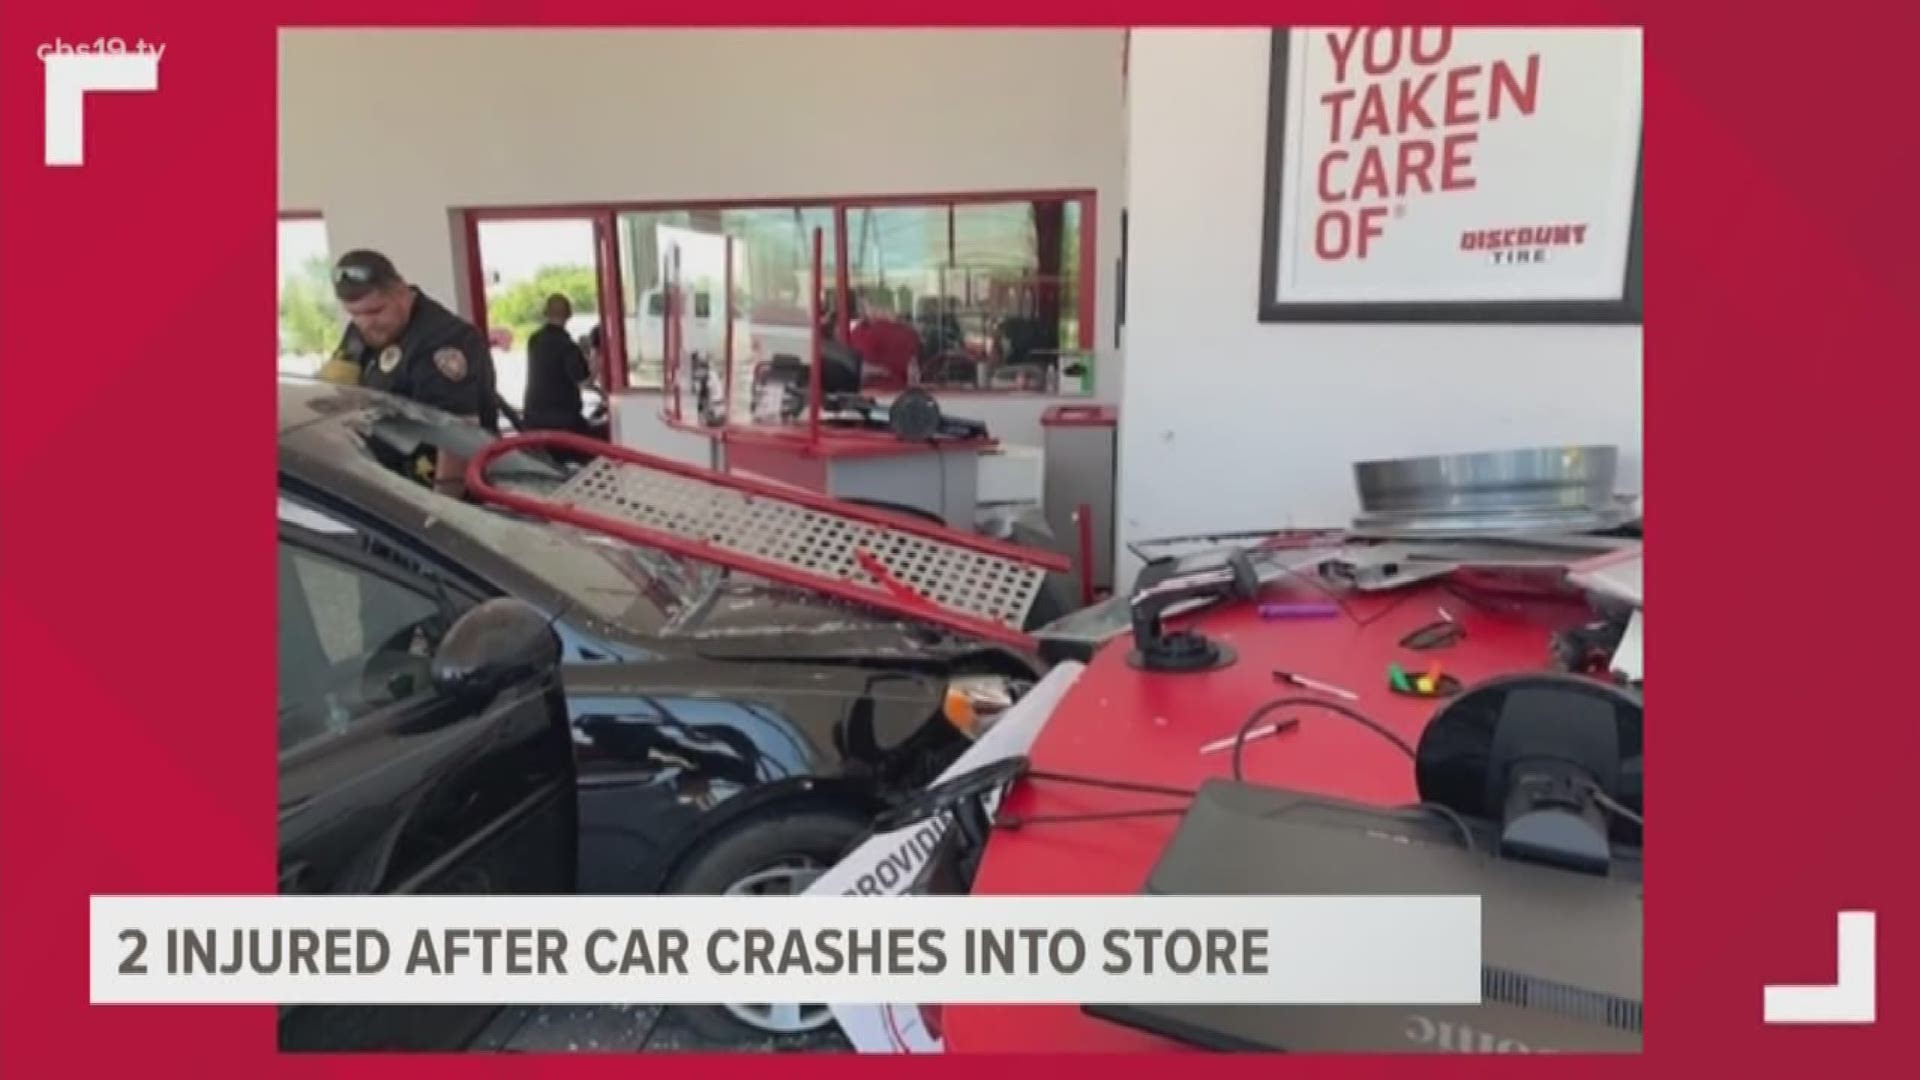 Two people were sent to the hospital after a vehicle crashed into the lobby of Discount Tire in Gun Barrel City on Monday afternoon.